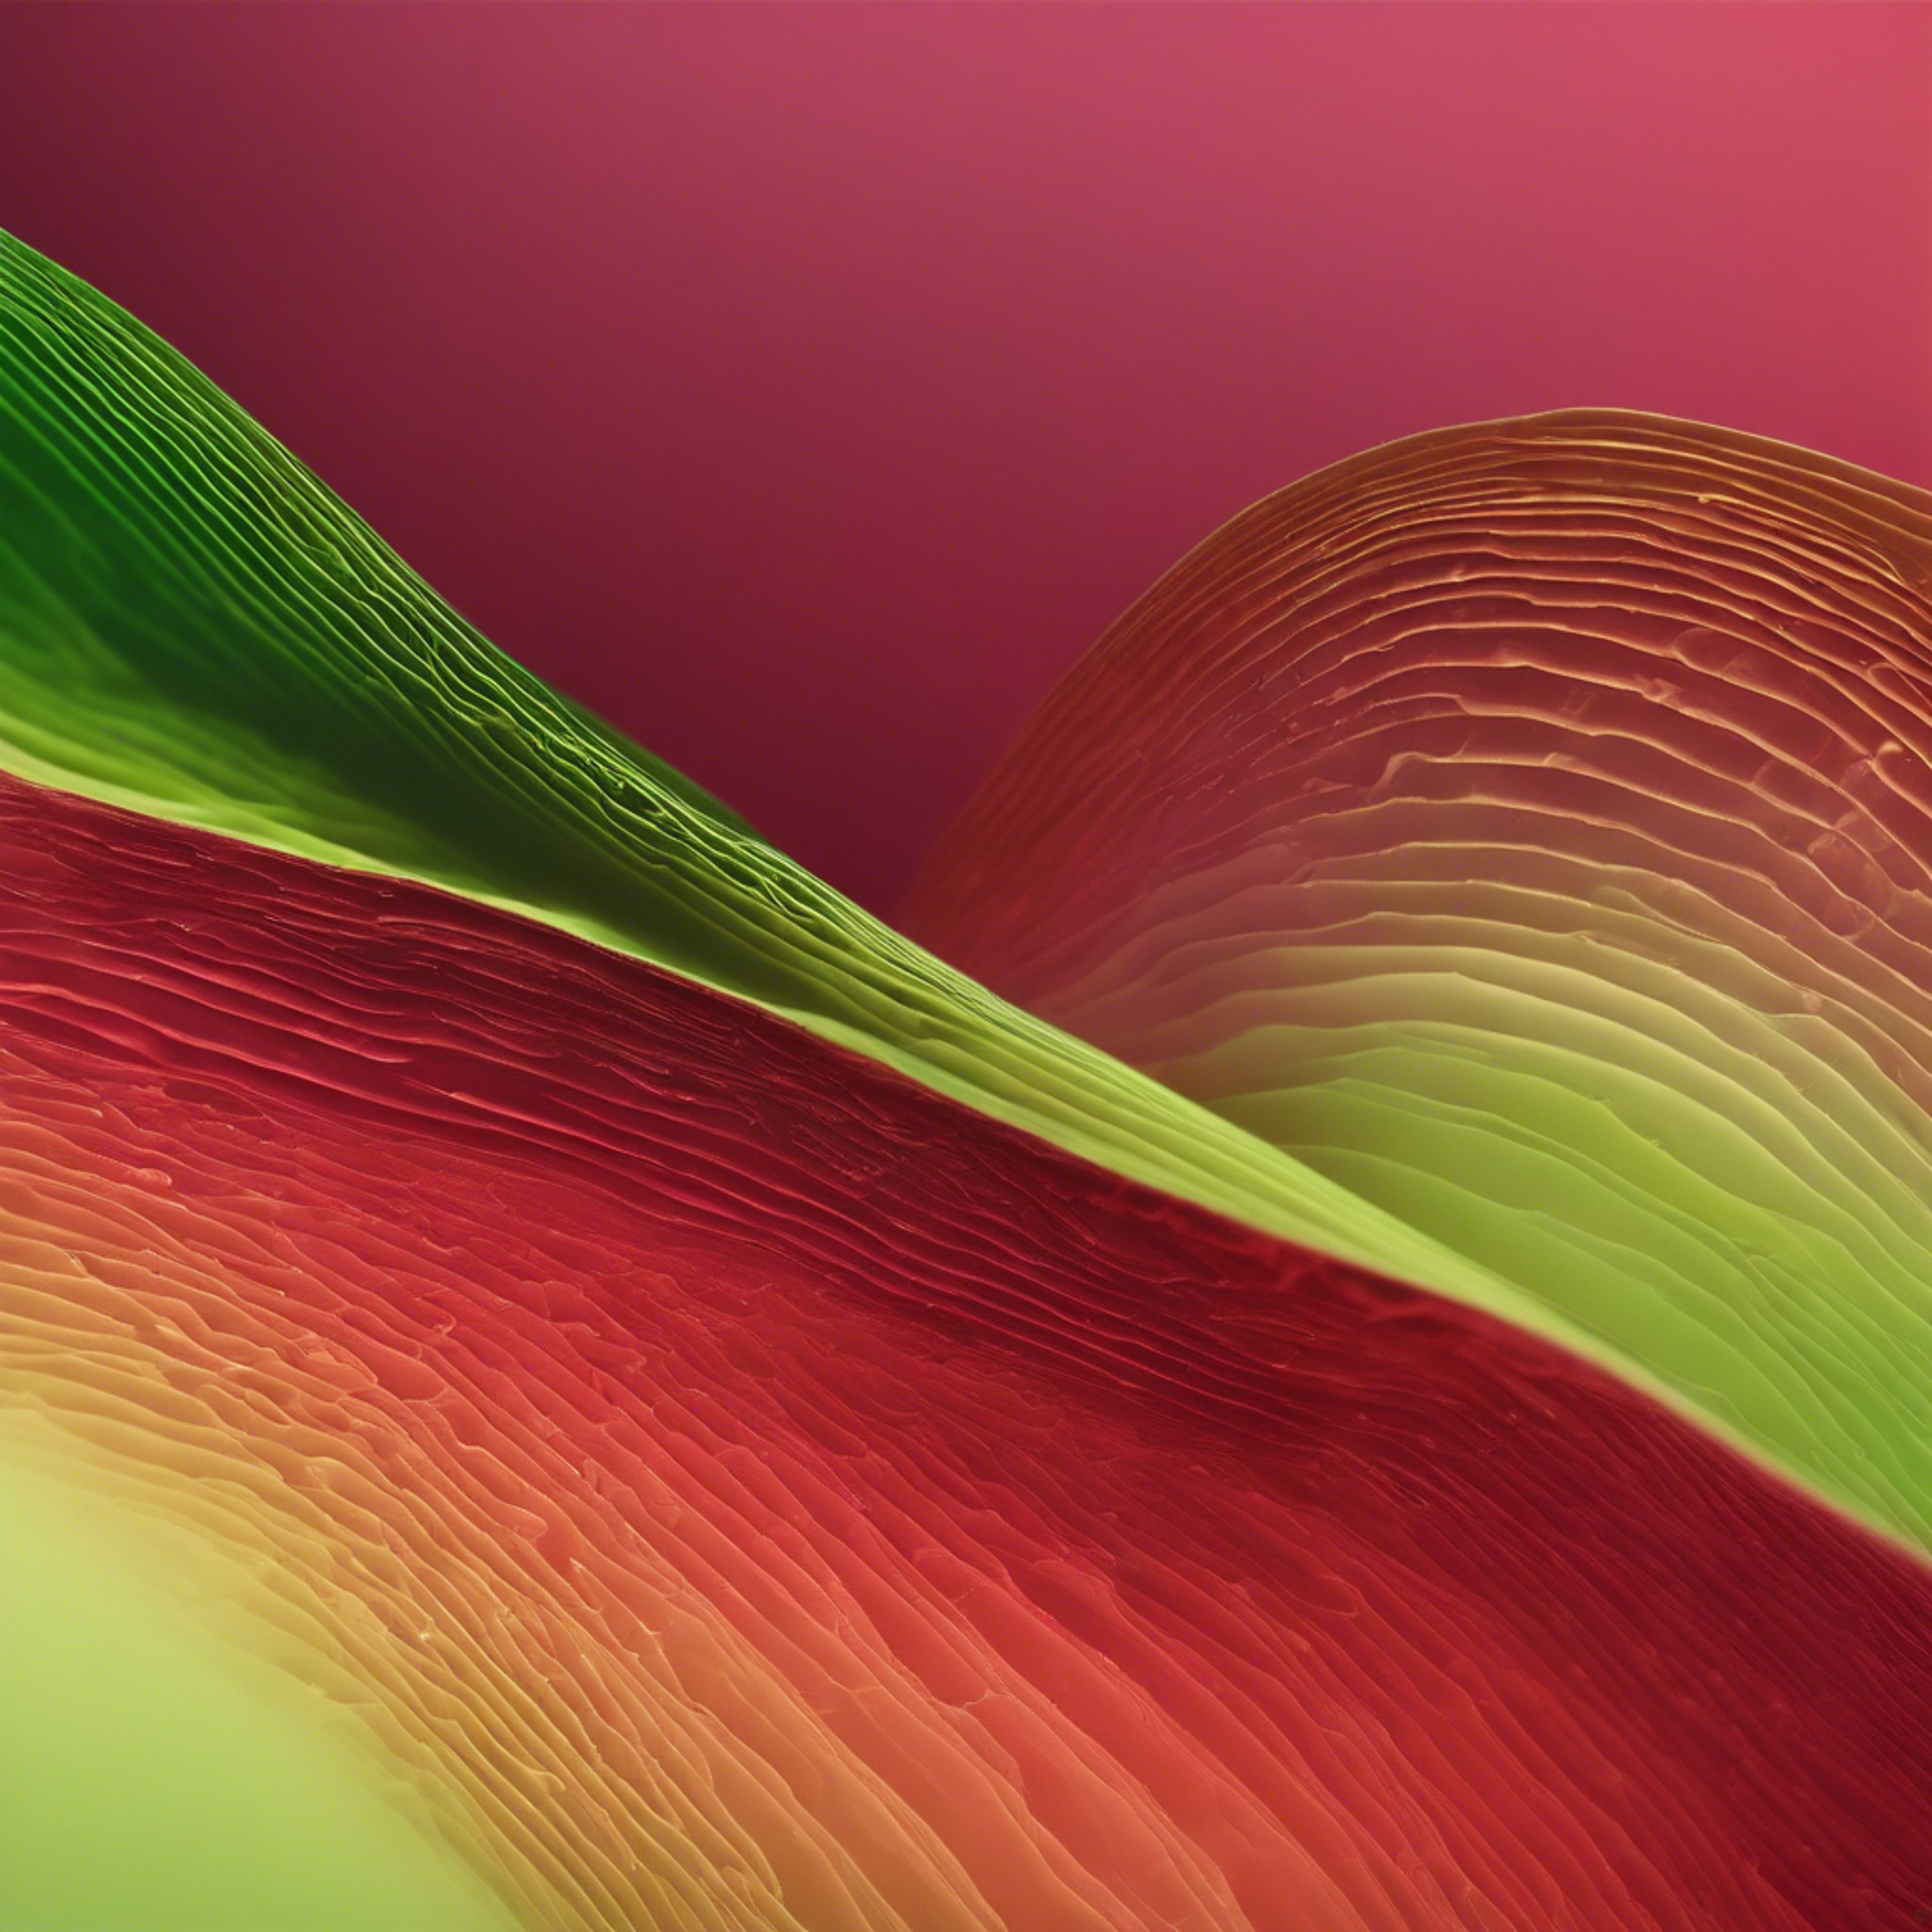 Design portraying a gradient flow from ruby red to lime green Tapéta[3ca7b80b590c439f91ba]